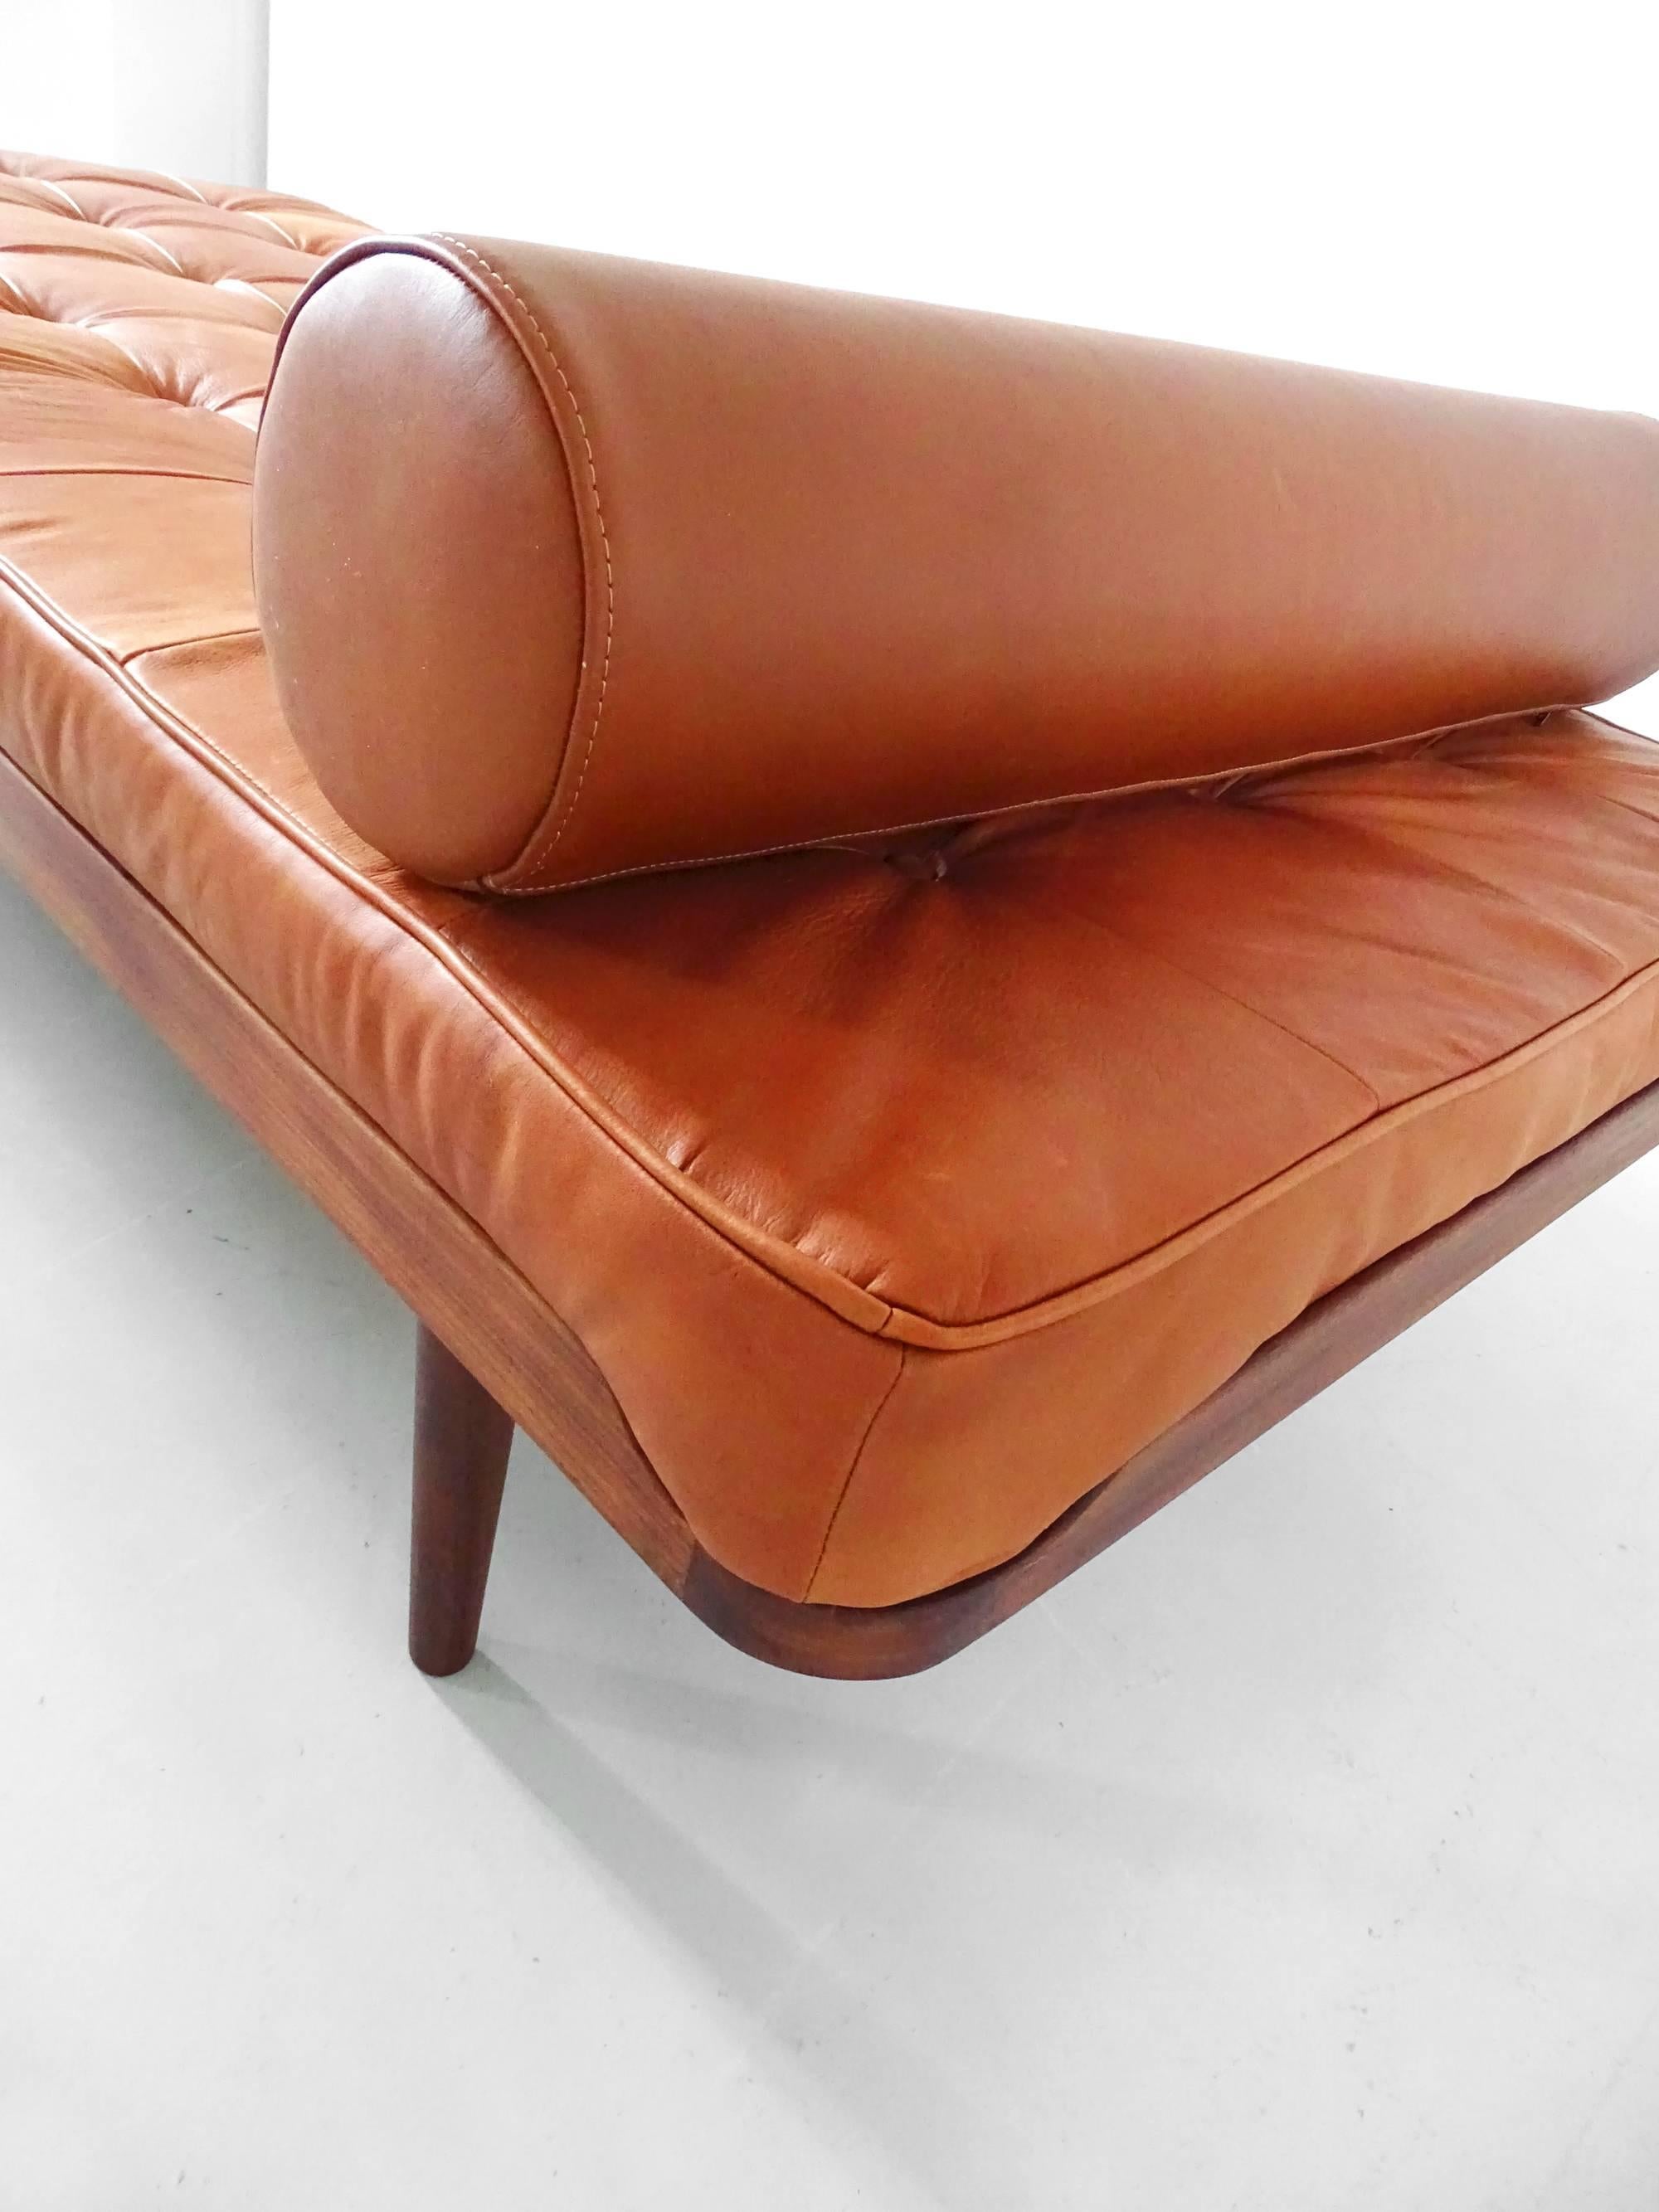 Mid-20th Century Grete Jalk Daybed in Teak and Cognac Leather for P. Jeppesen, Denmark, 1960 For Sale